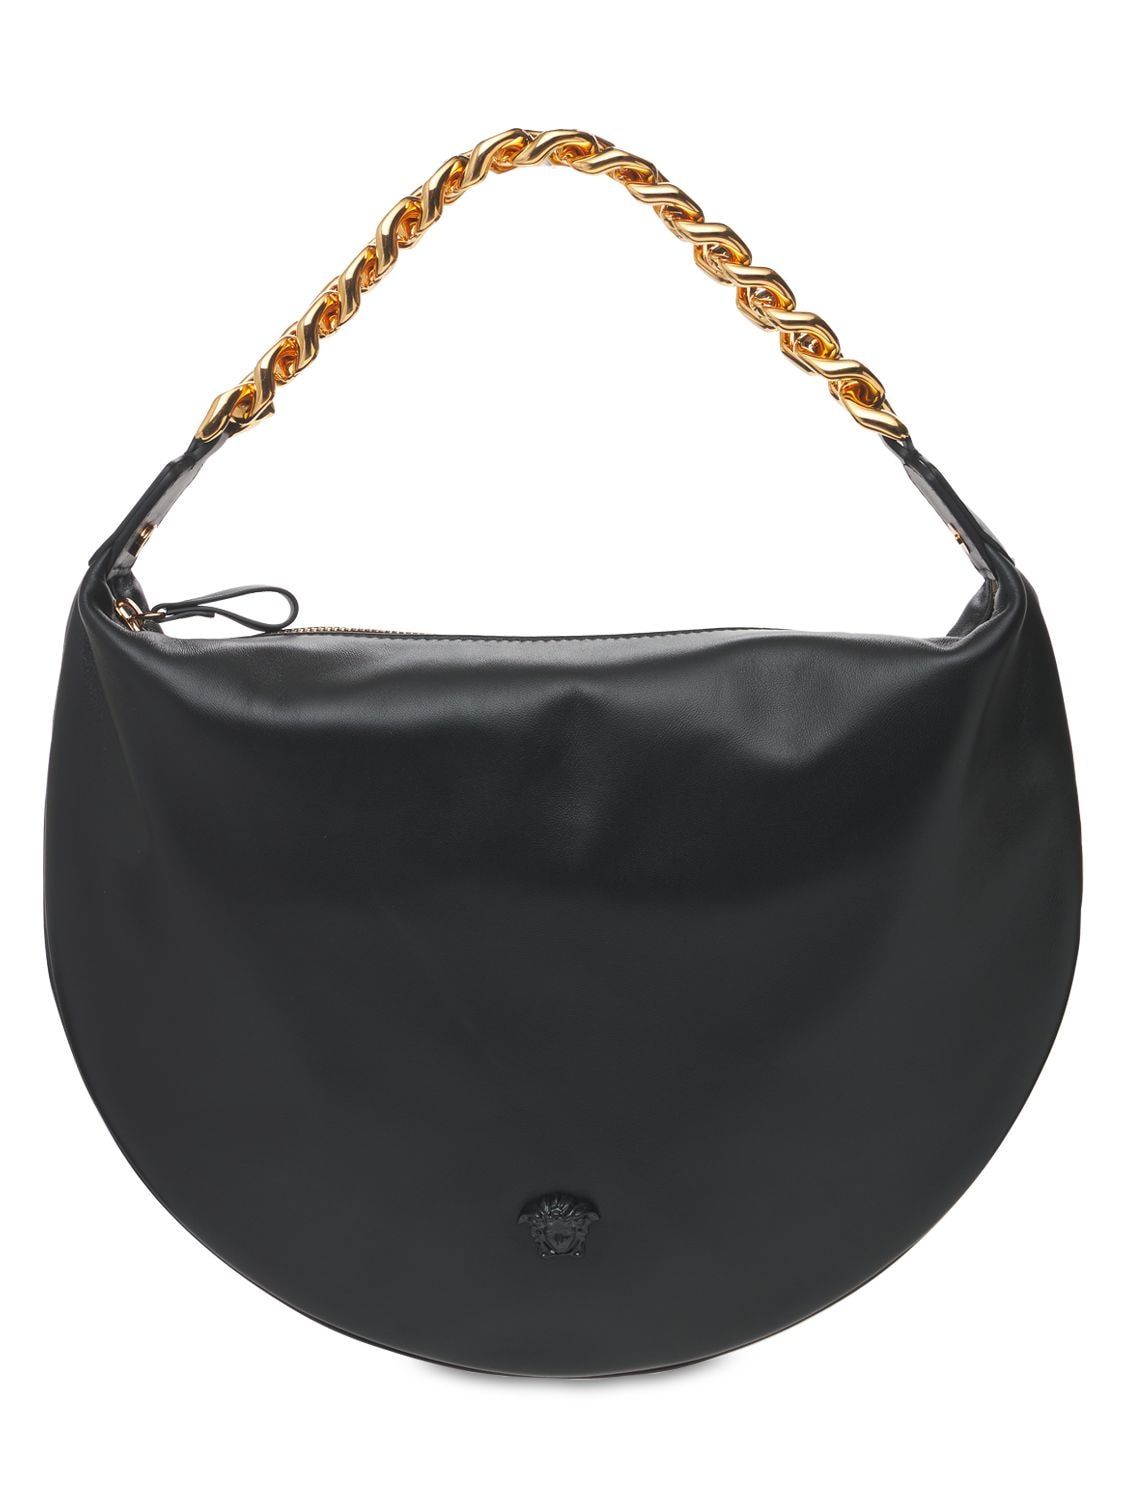 Versace Leather Hobo Bag W/chain Strap In Black